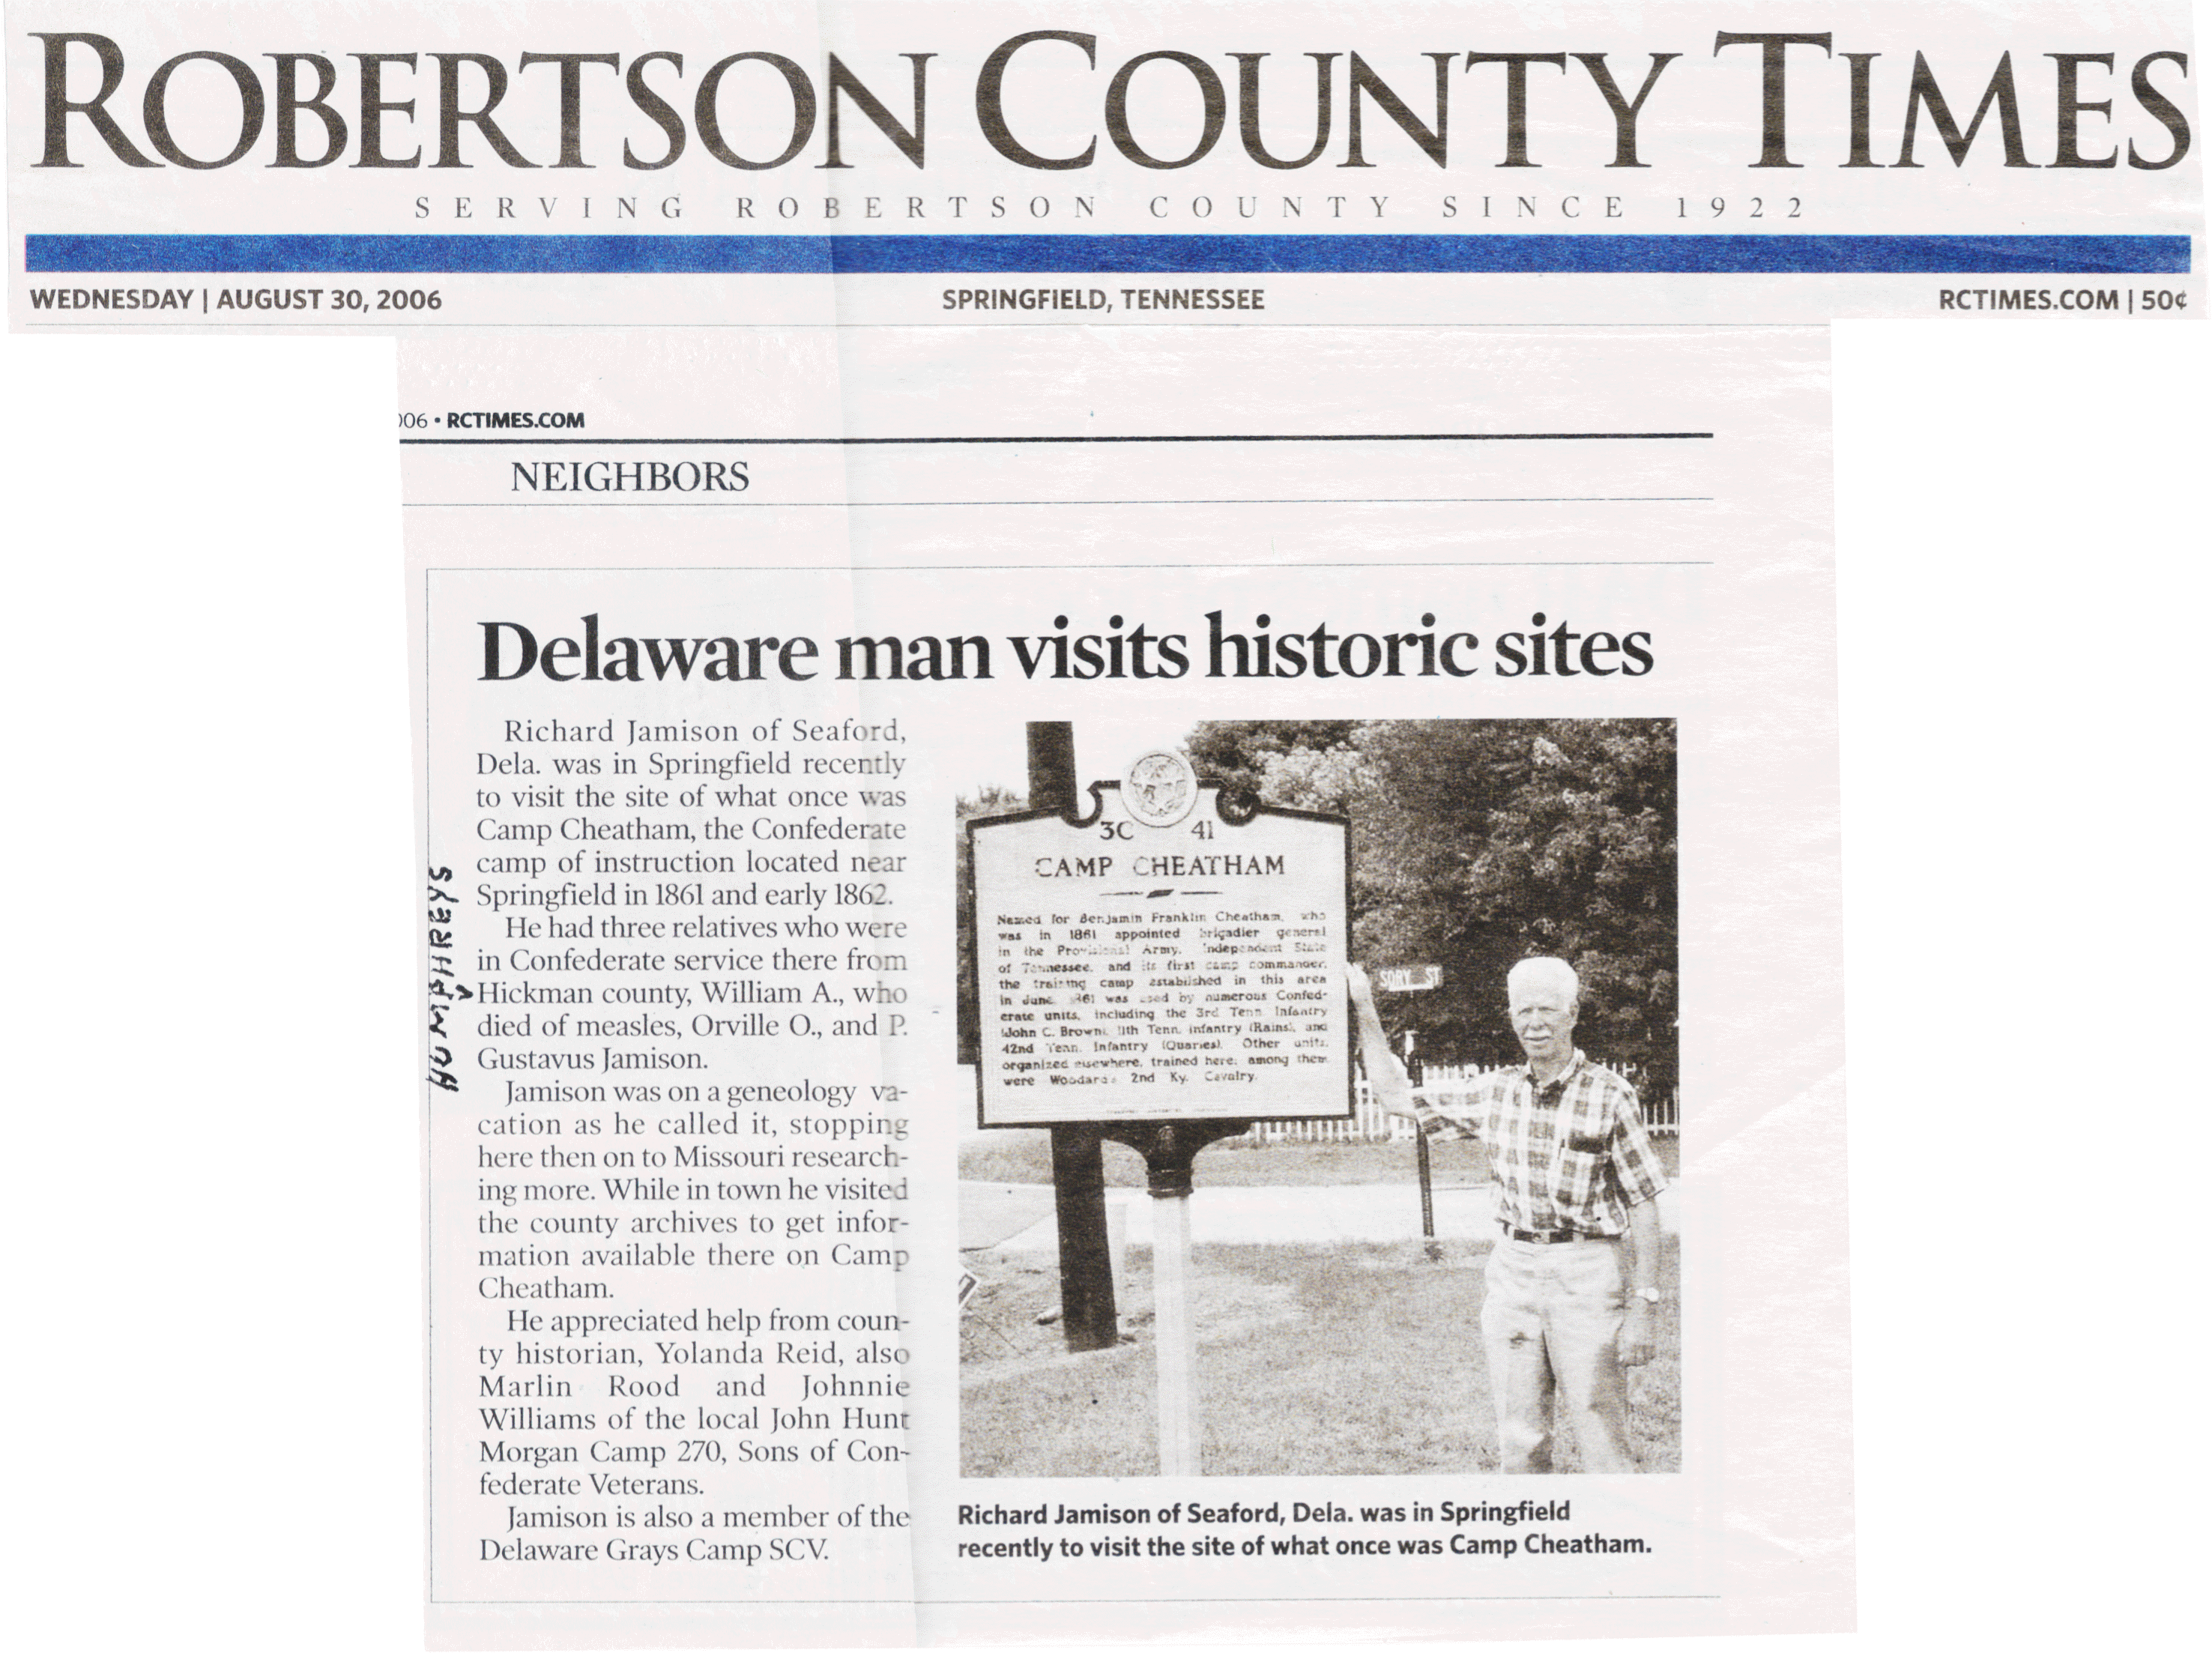 This article is about Mr. Richard J. Jamison Sr.'s visitation to Cheatham, Tennessee where his ancestors enlisted for Confederate service.